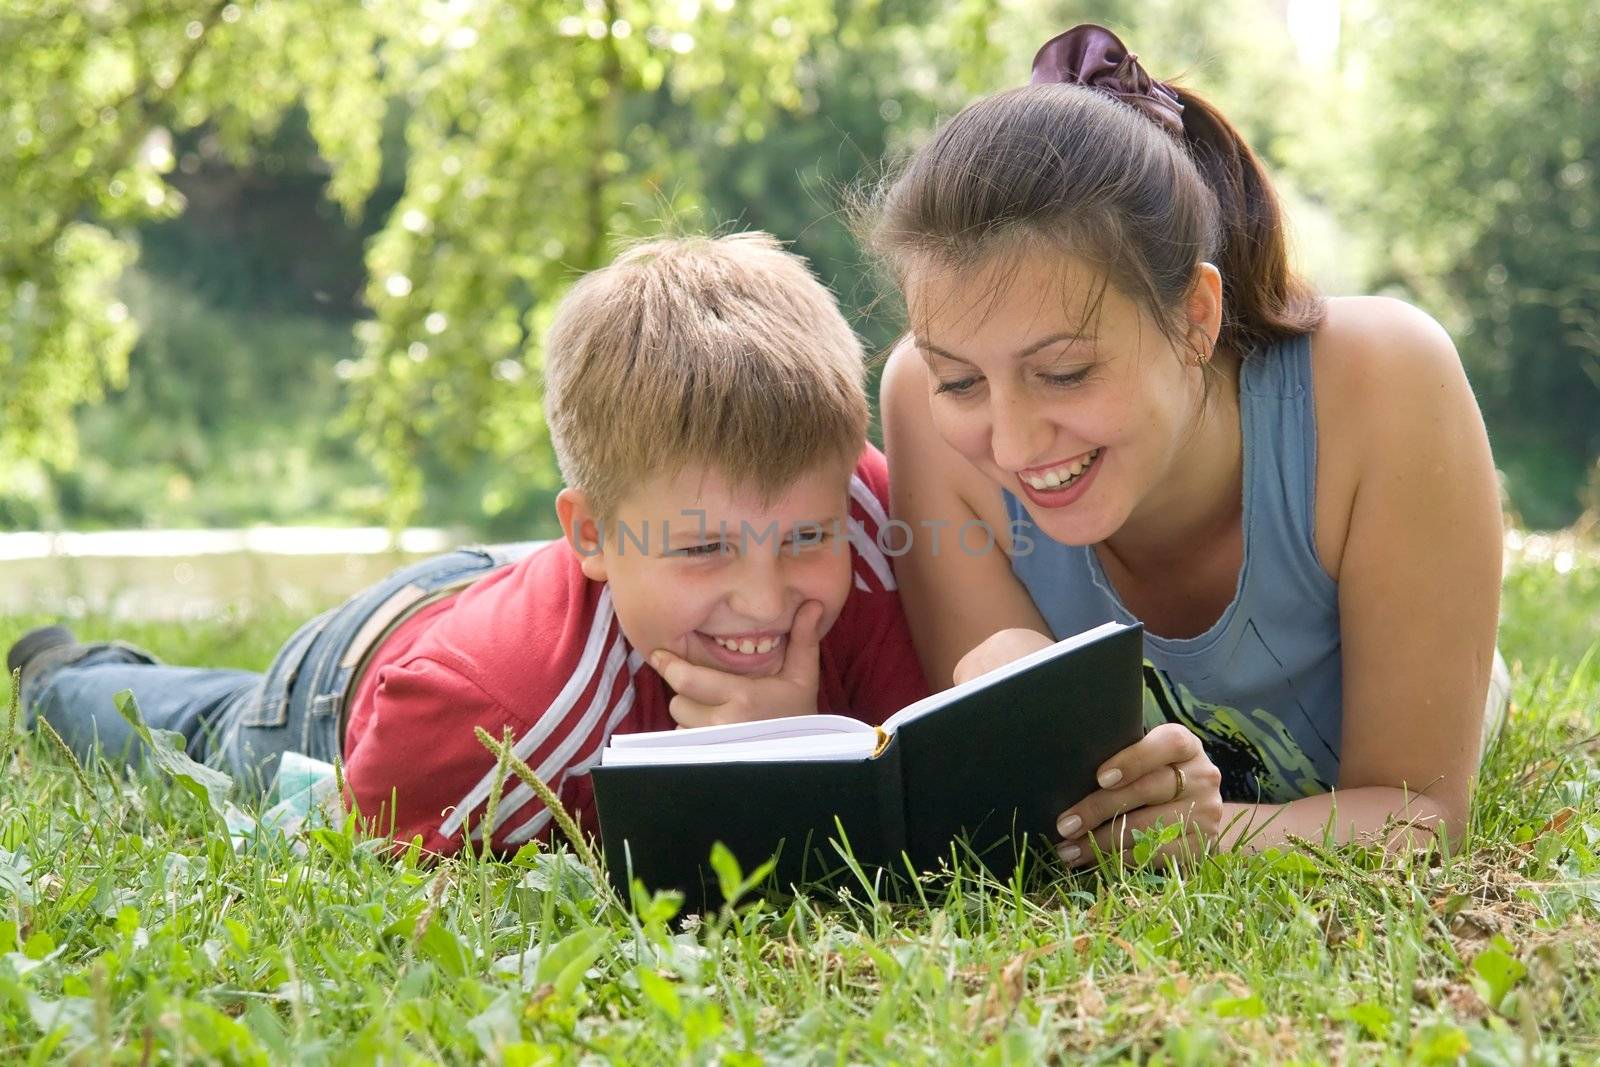 Mum and the son reads the book on a lawn in park